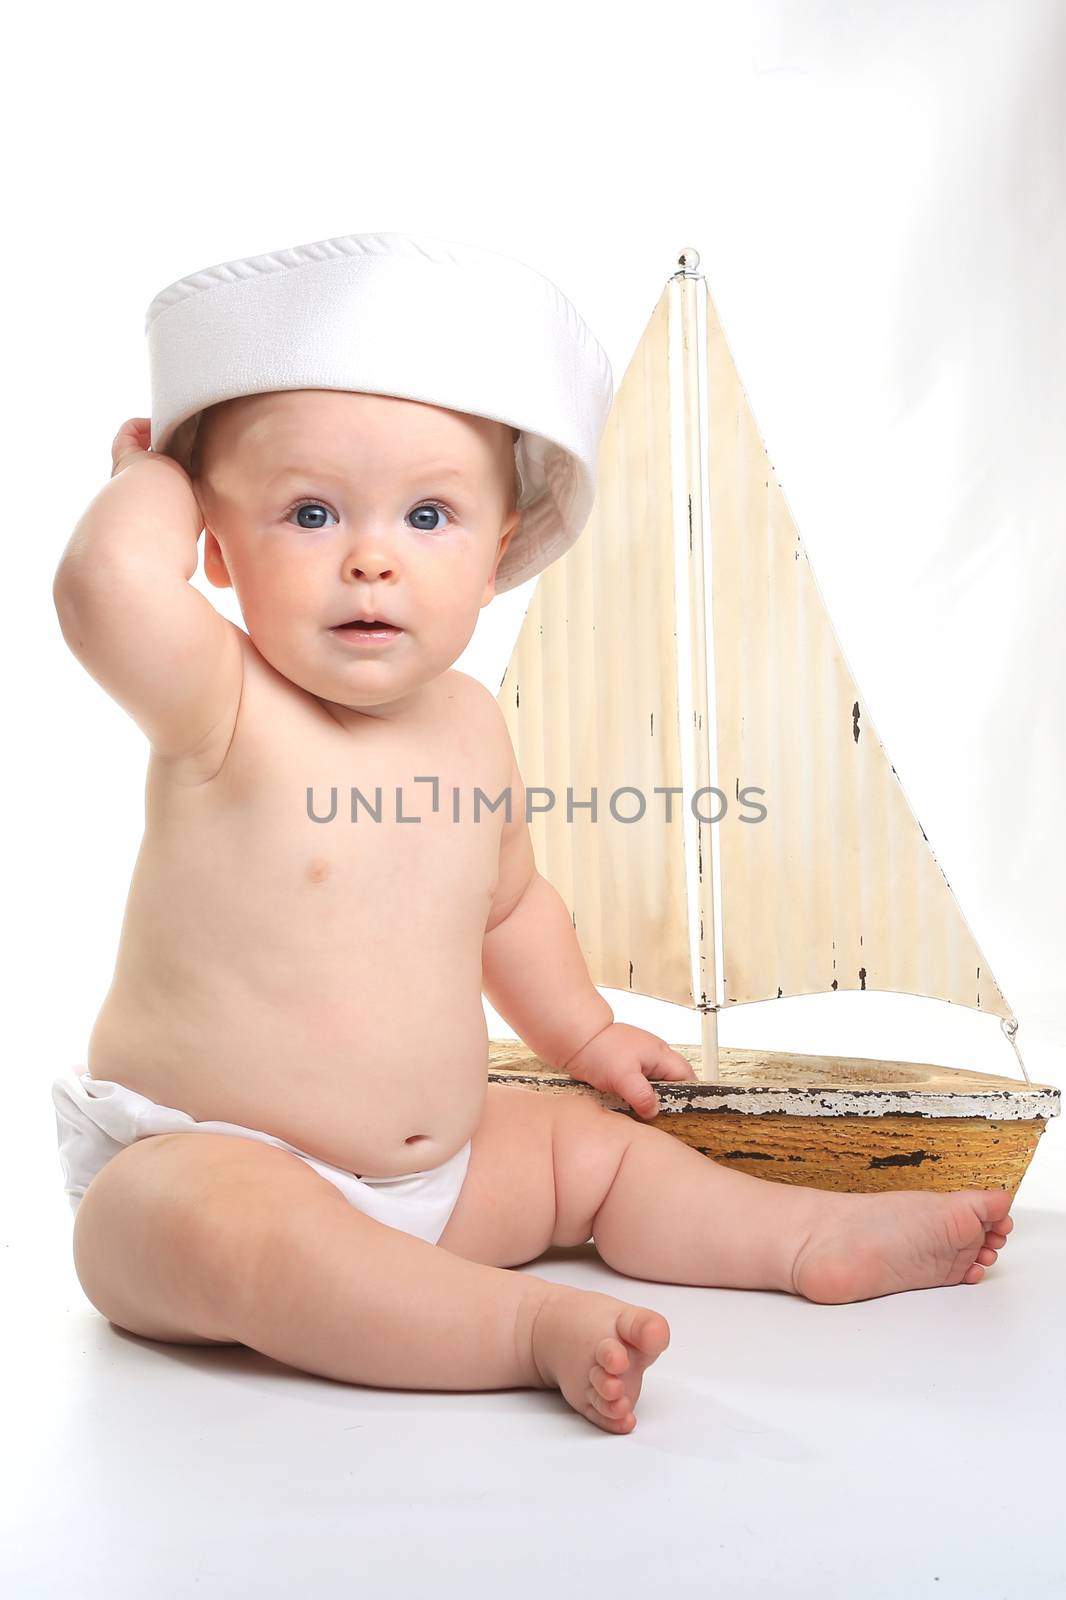 Toddler Sitting up Wearing Sailor Hat on White Background by tobkatrina